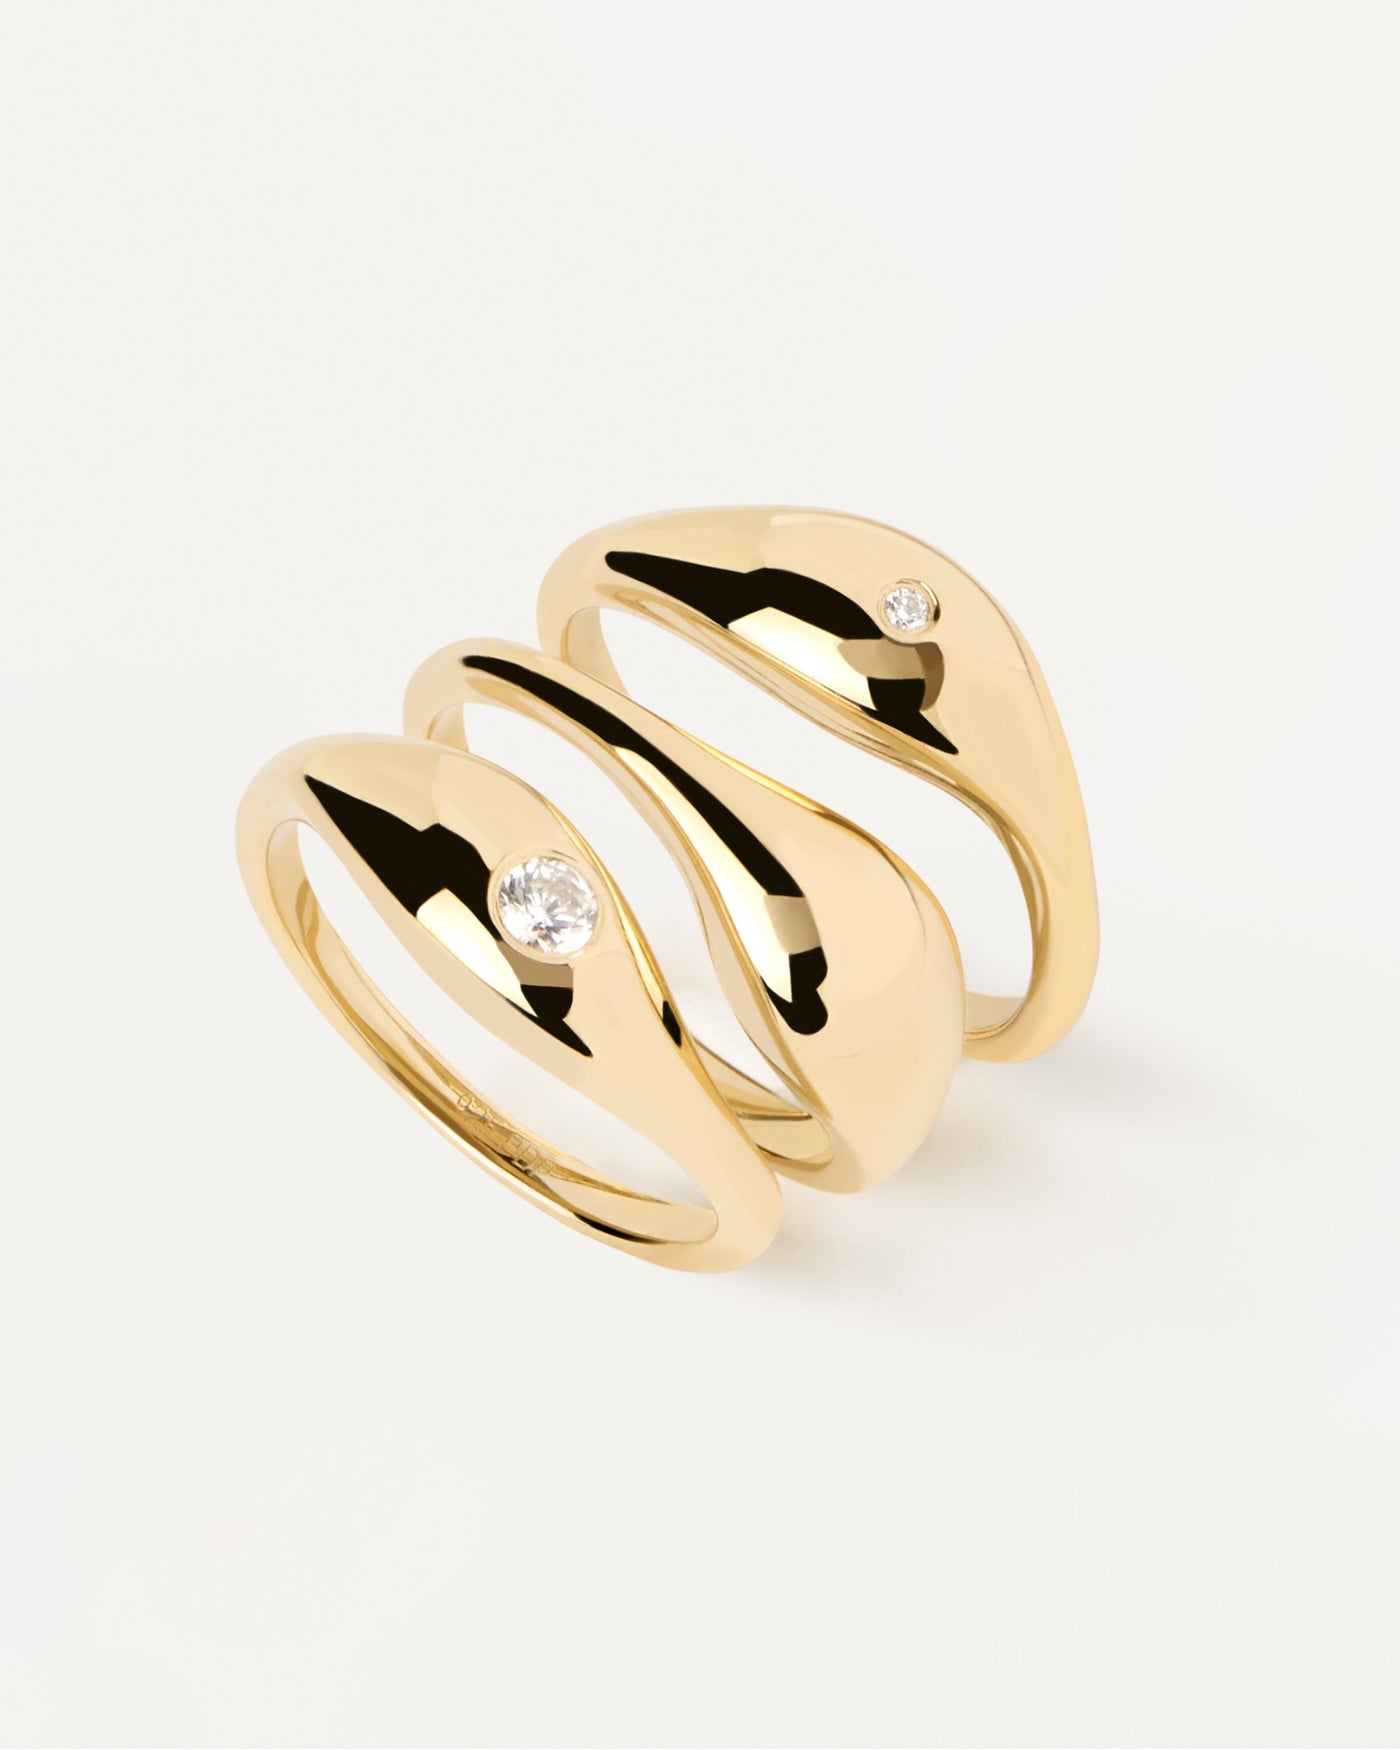 2023 Selection | Sugar Ring Set. Gold-plated silver set of three signet rings with white zirconia. Get the latest arrival from PDPAOLA. Place your order safely and get this Best Seller. Free Shipping.